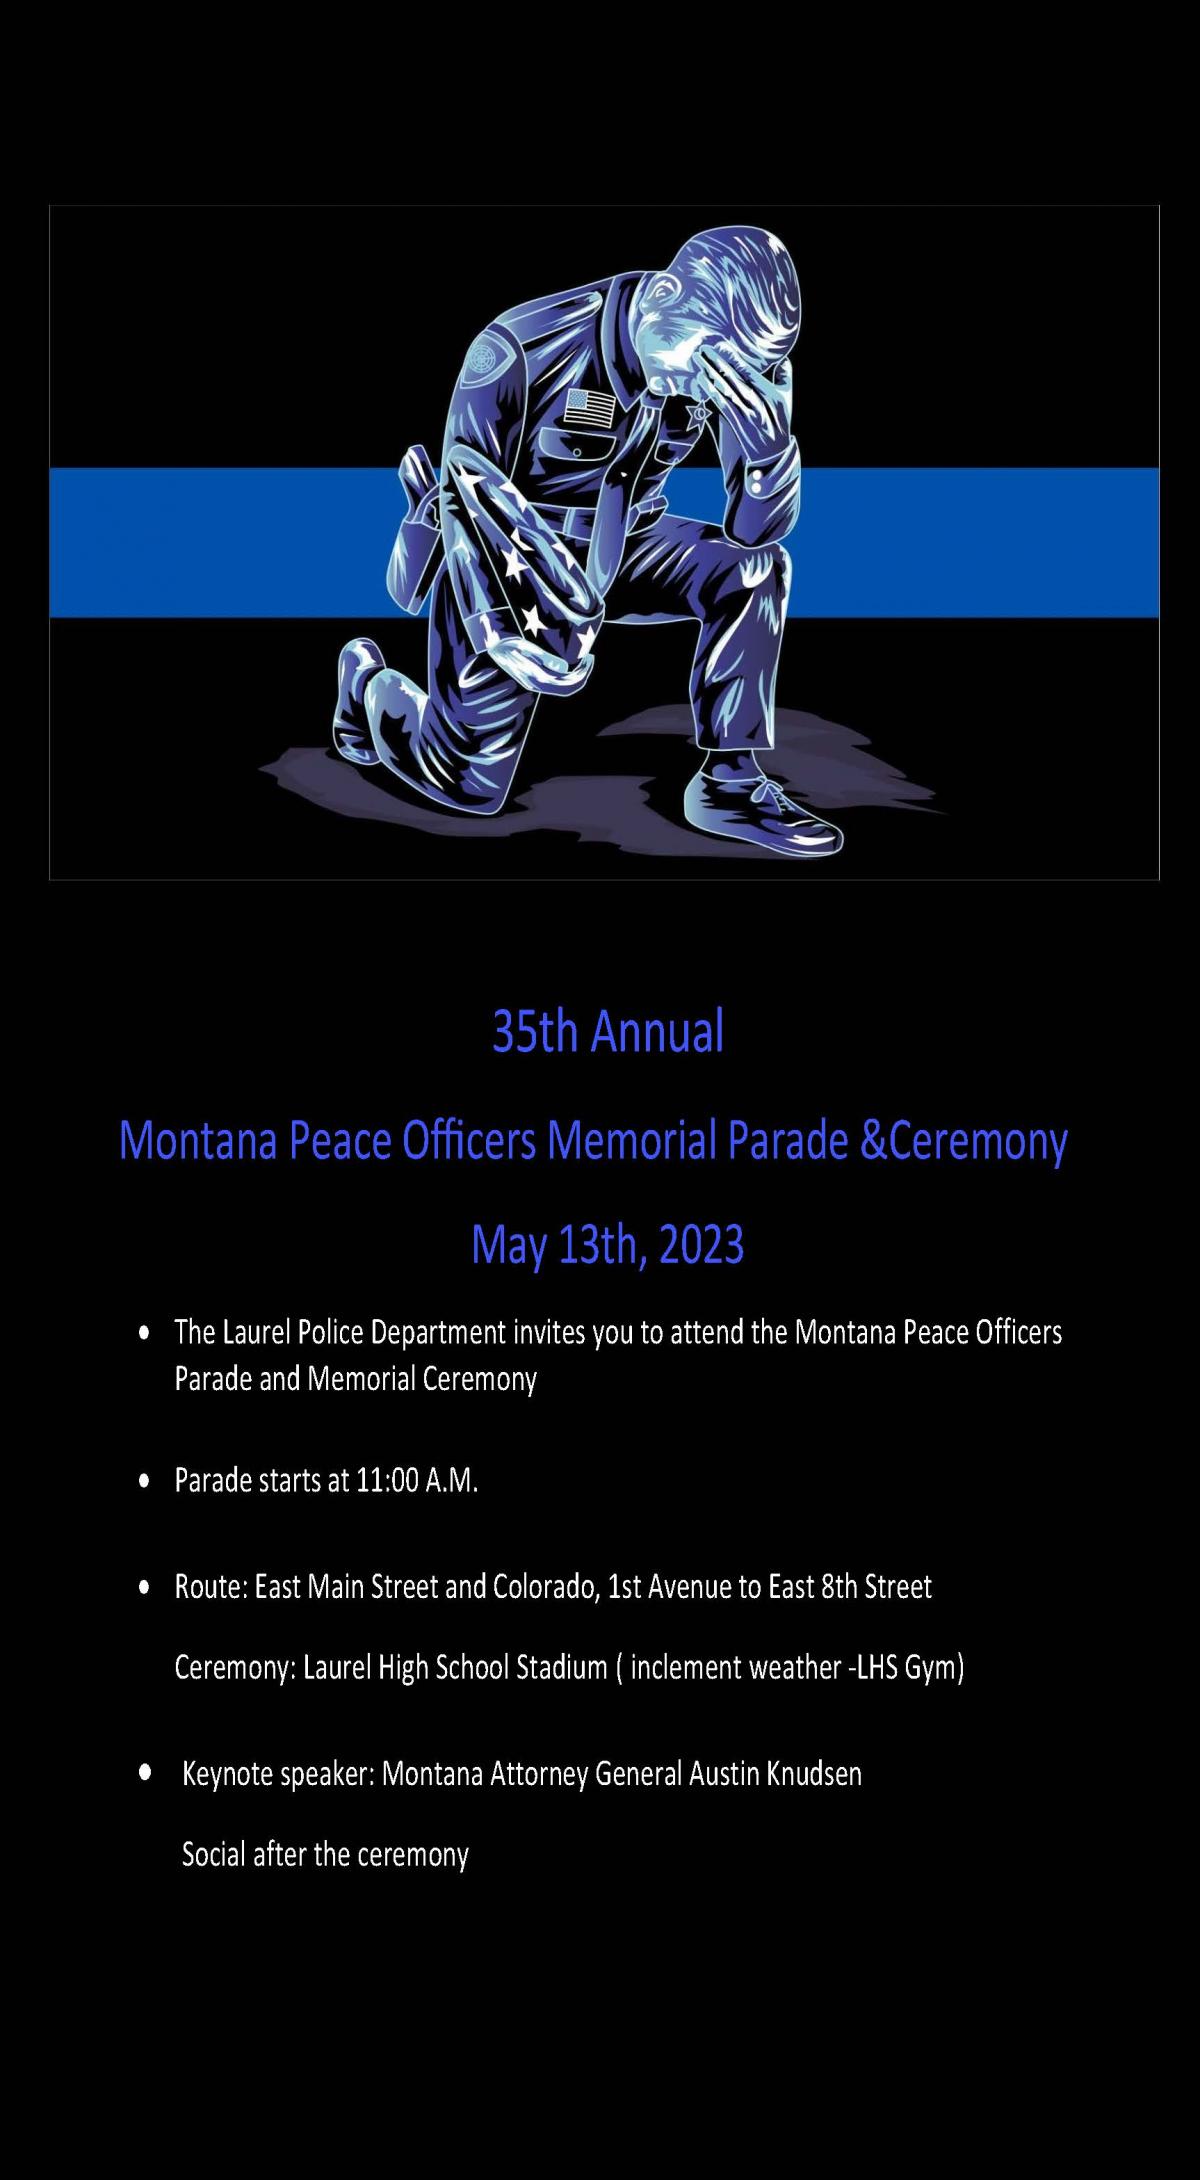 35th Annual Montana Peace Officers Memorial Parade & Ceremony 